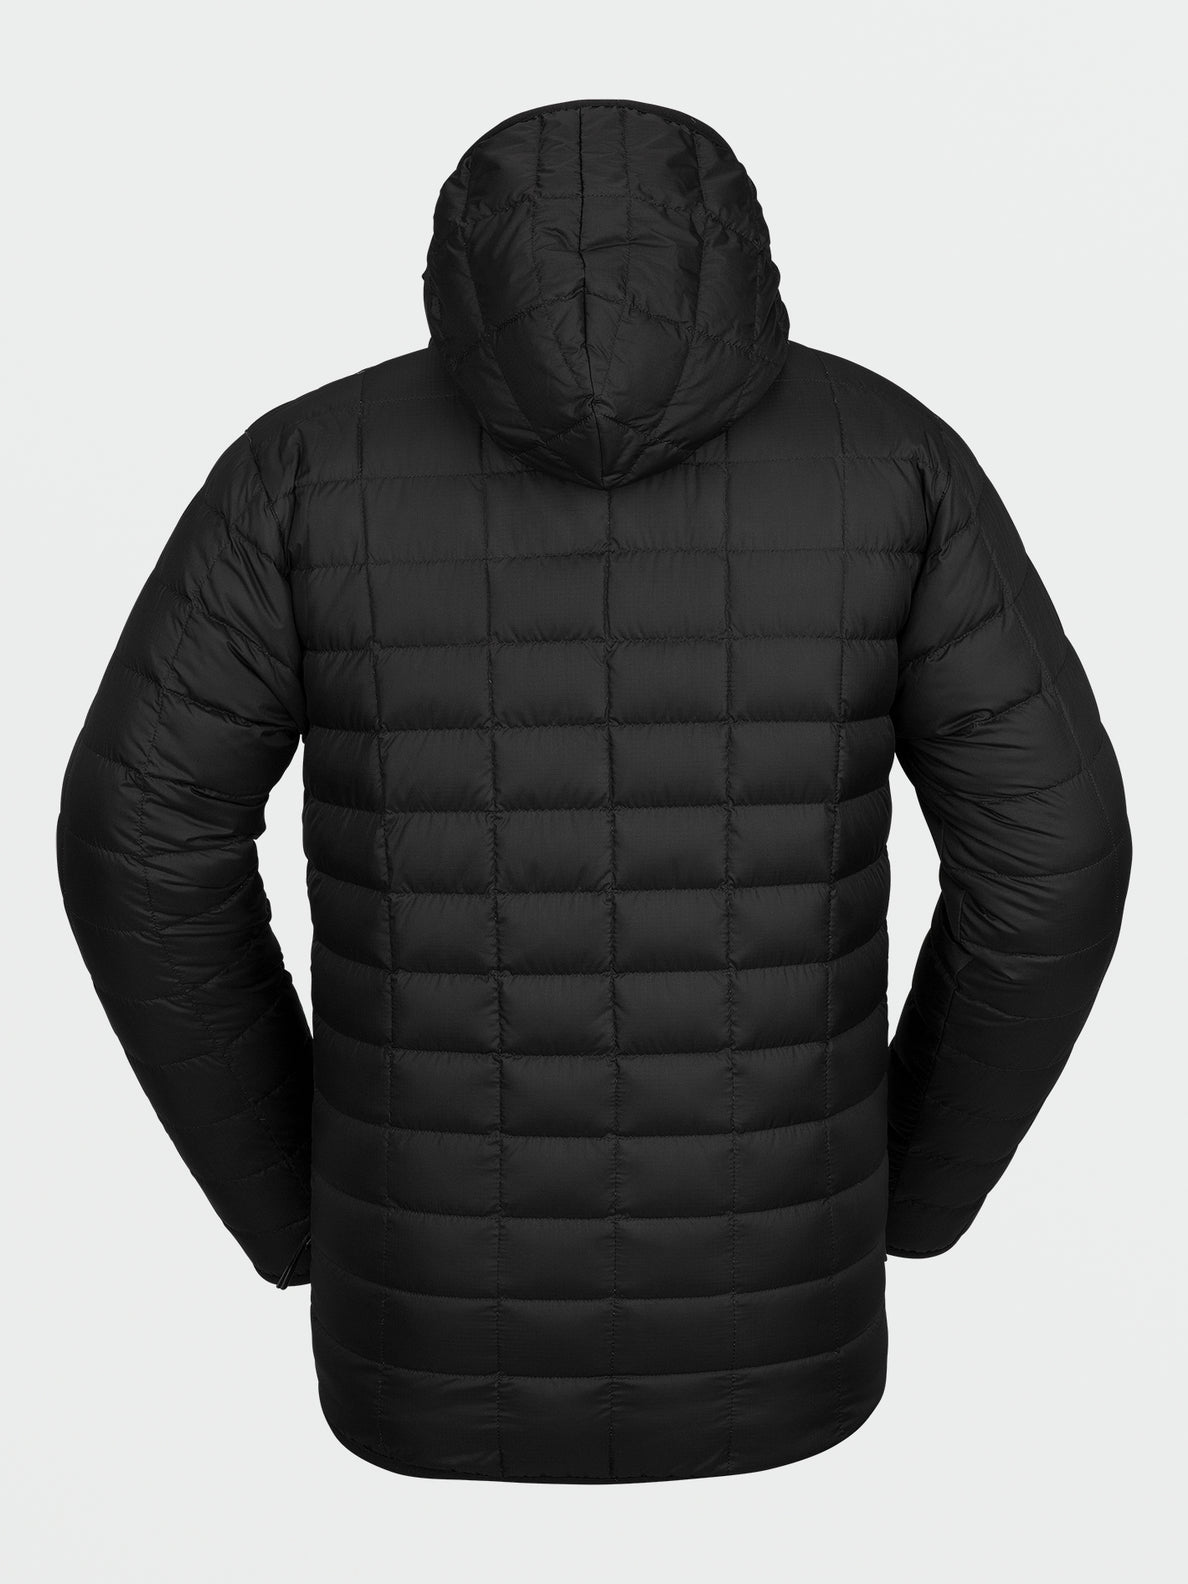 Mens Puff Puff Give Jacket - Black (G0452310_BLK) [6]